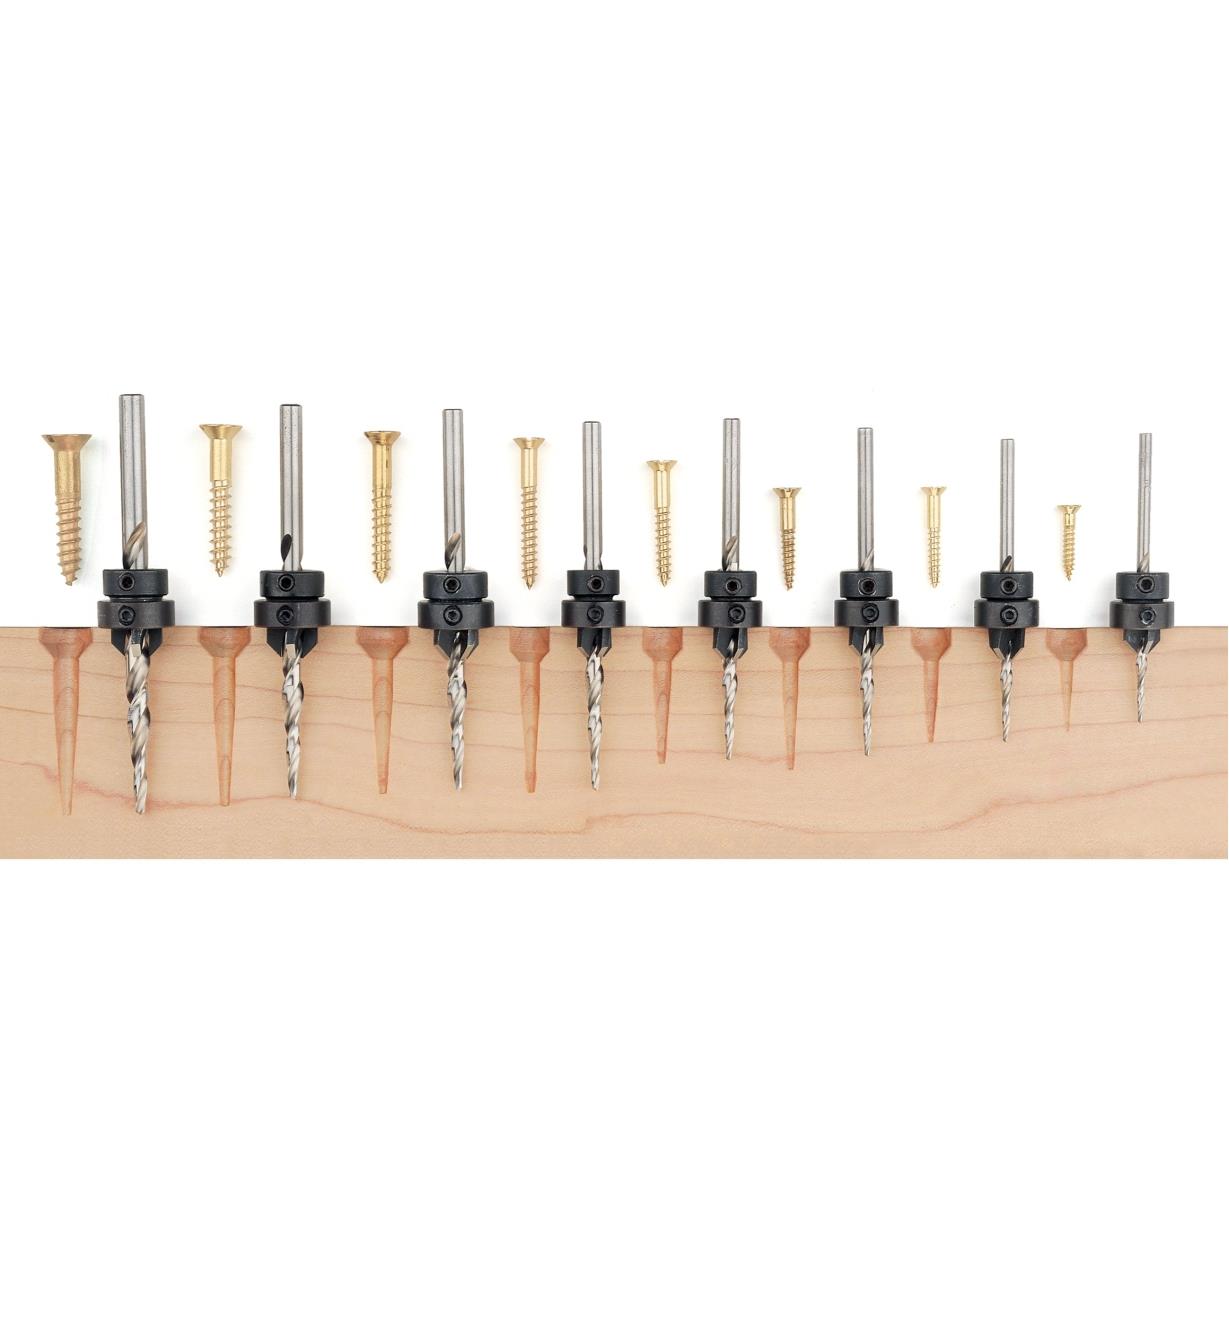 07J1580 - Boxed Set of 8 Complete Drill / Countersink / Counterbore Units (all sizes)